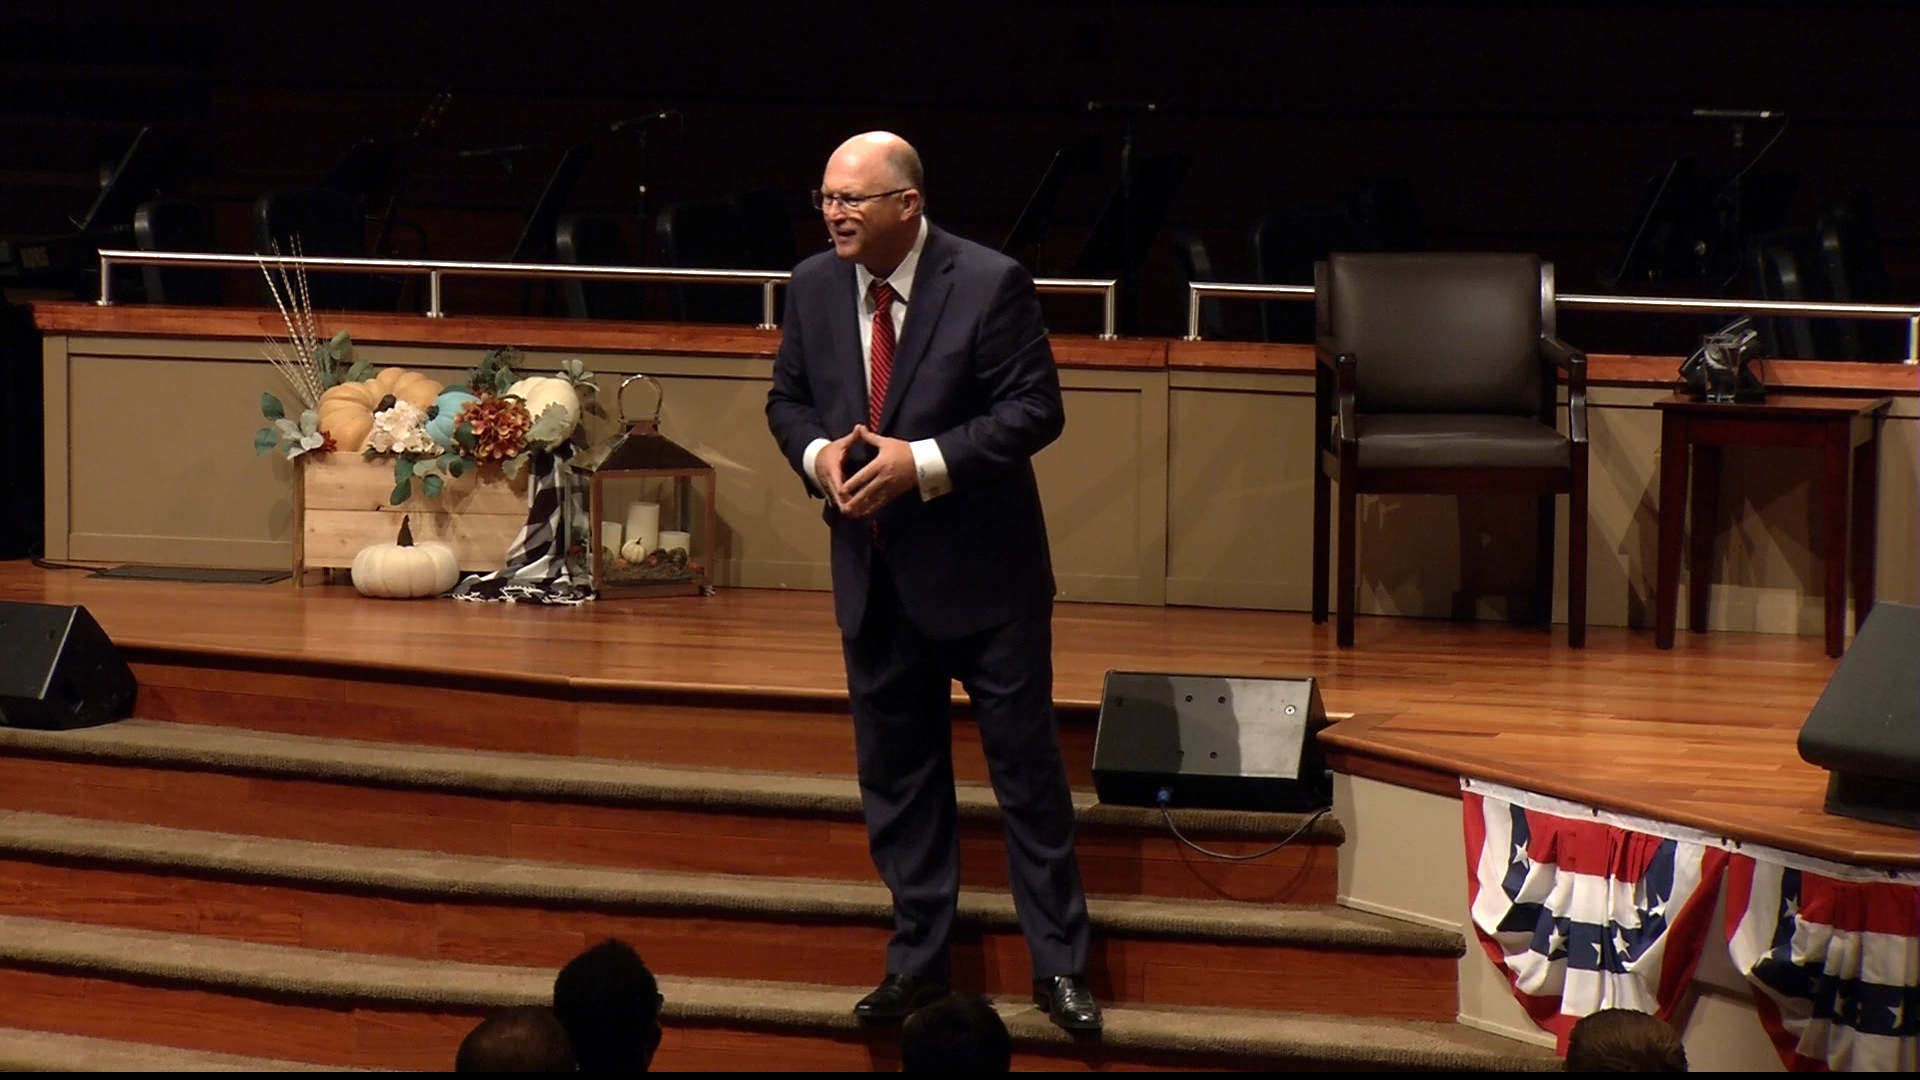 Pastor Paul Chappell: The Identity of the Man of God